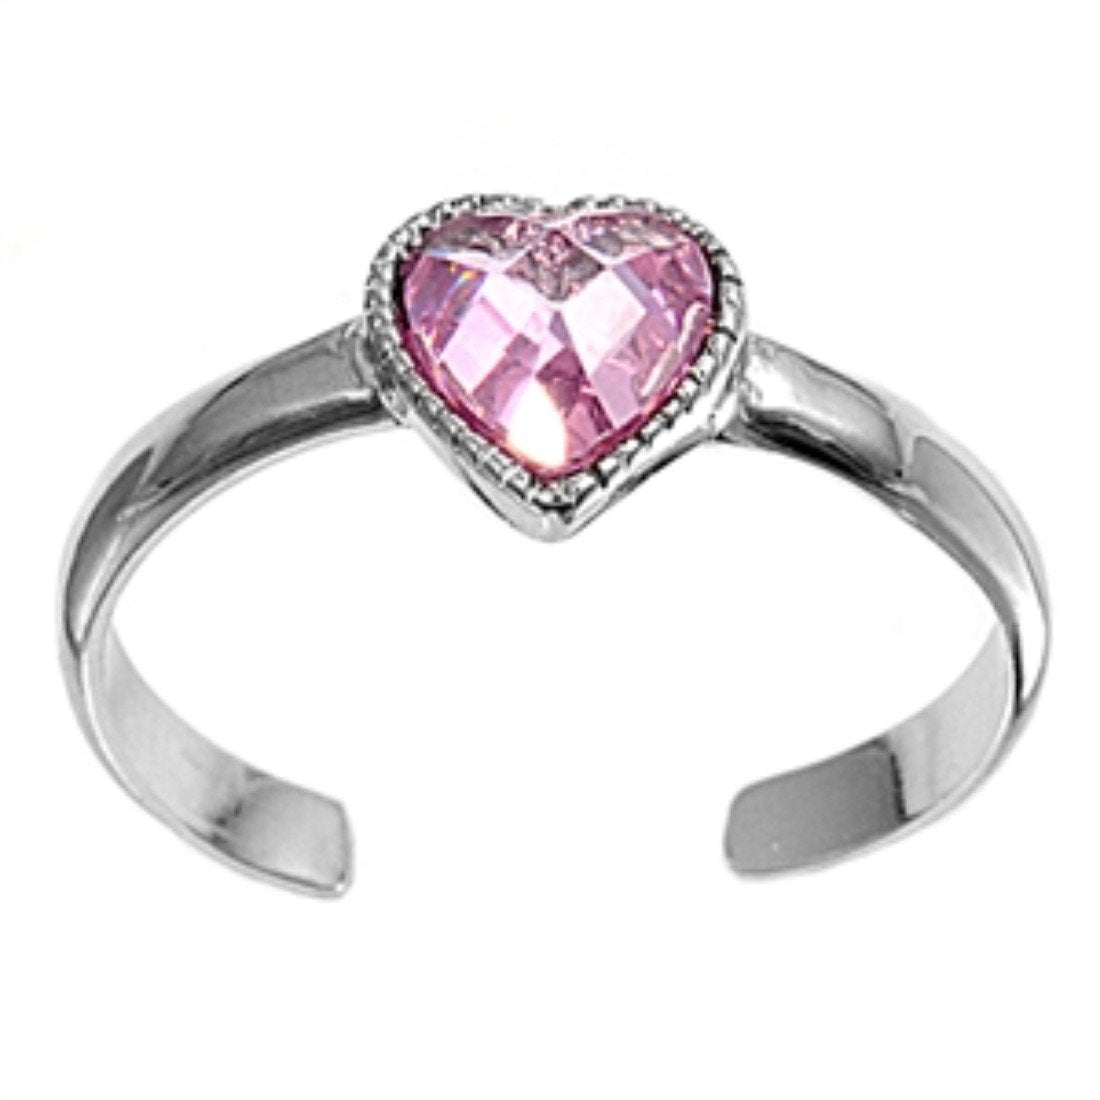 Silver Toe Ring Heart Simulated Pink CZ Adjustable 925 Sterling Silver (6mm)